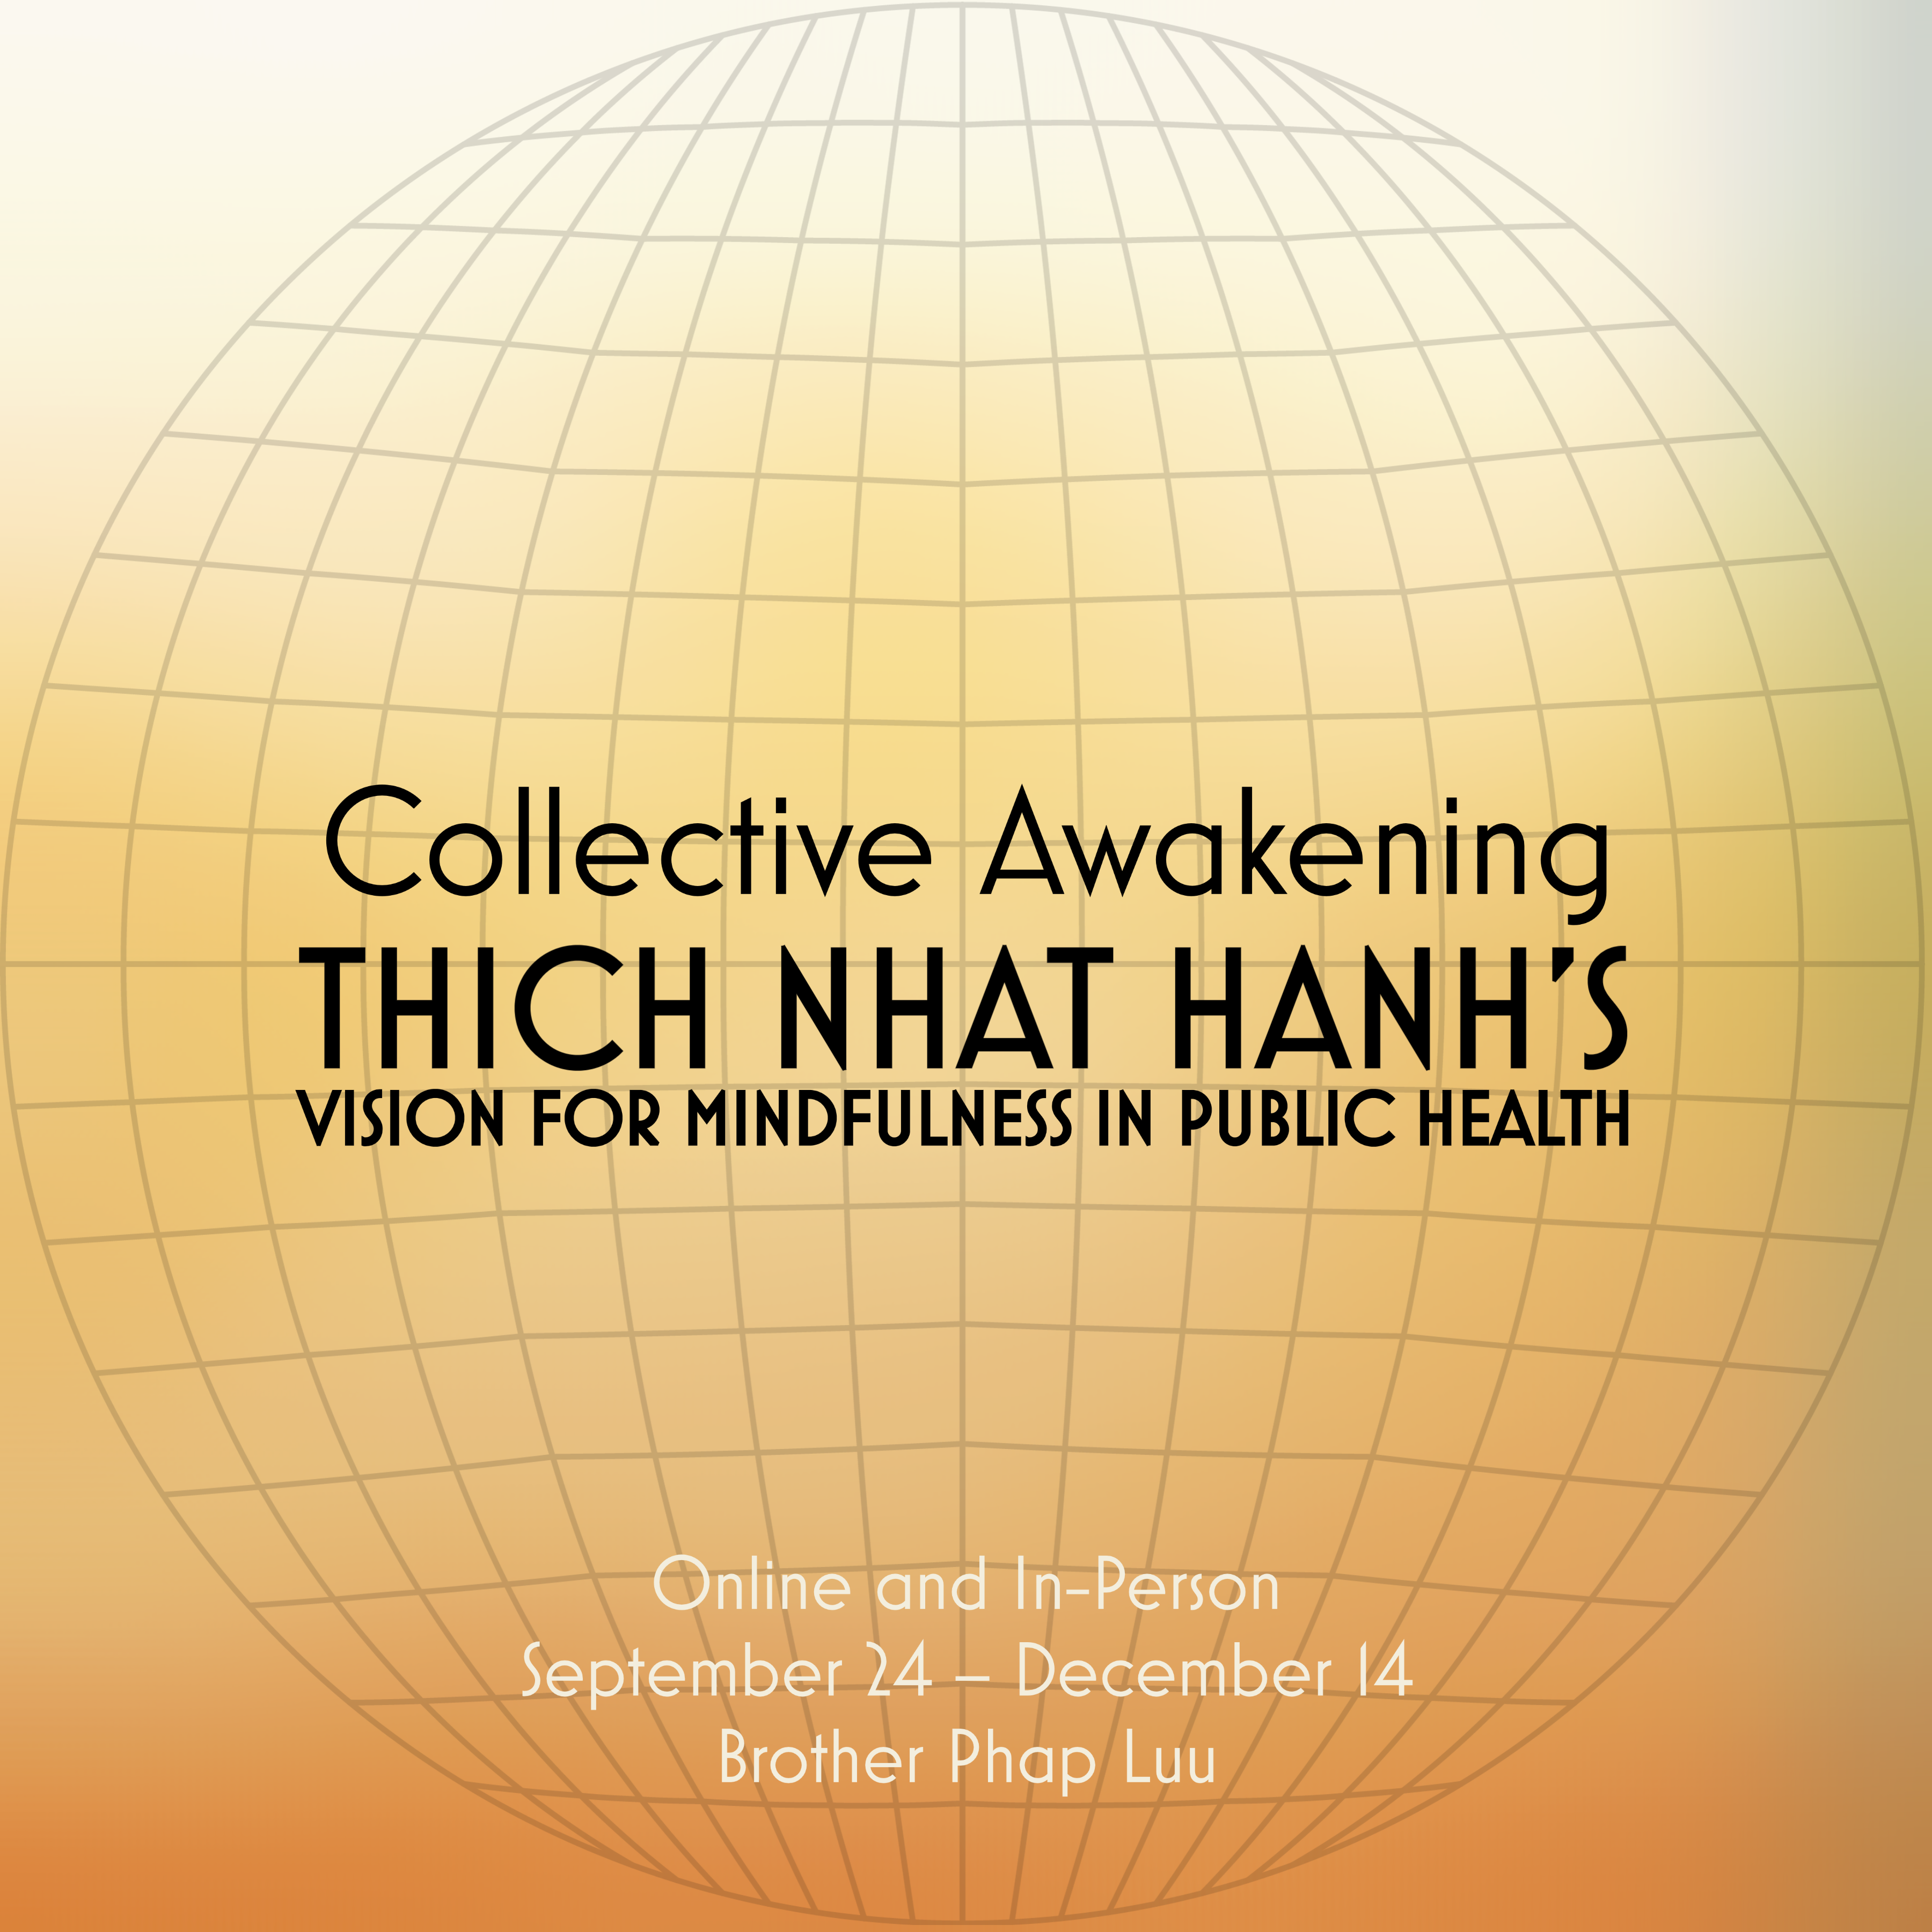 Collective Awakening: Thich Nhat Hanh’s Vision for Mindfulness in Public Health